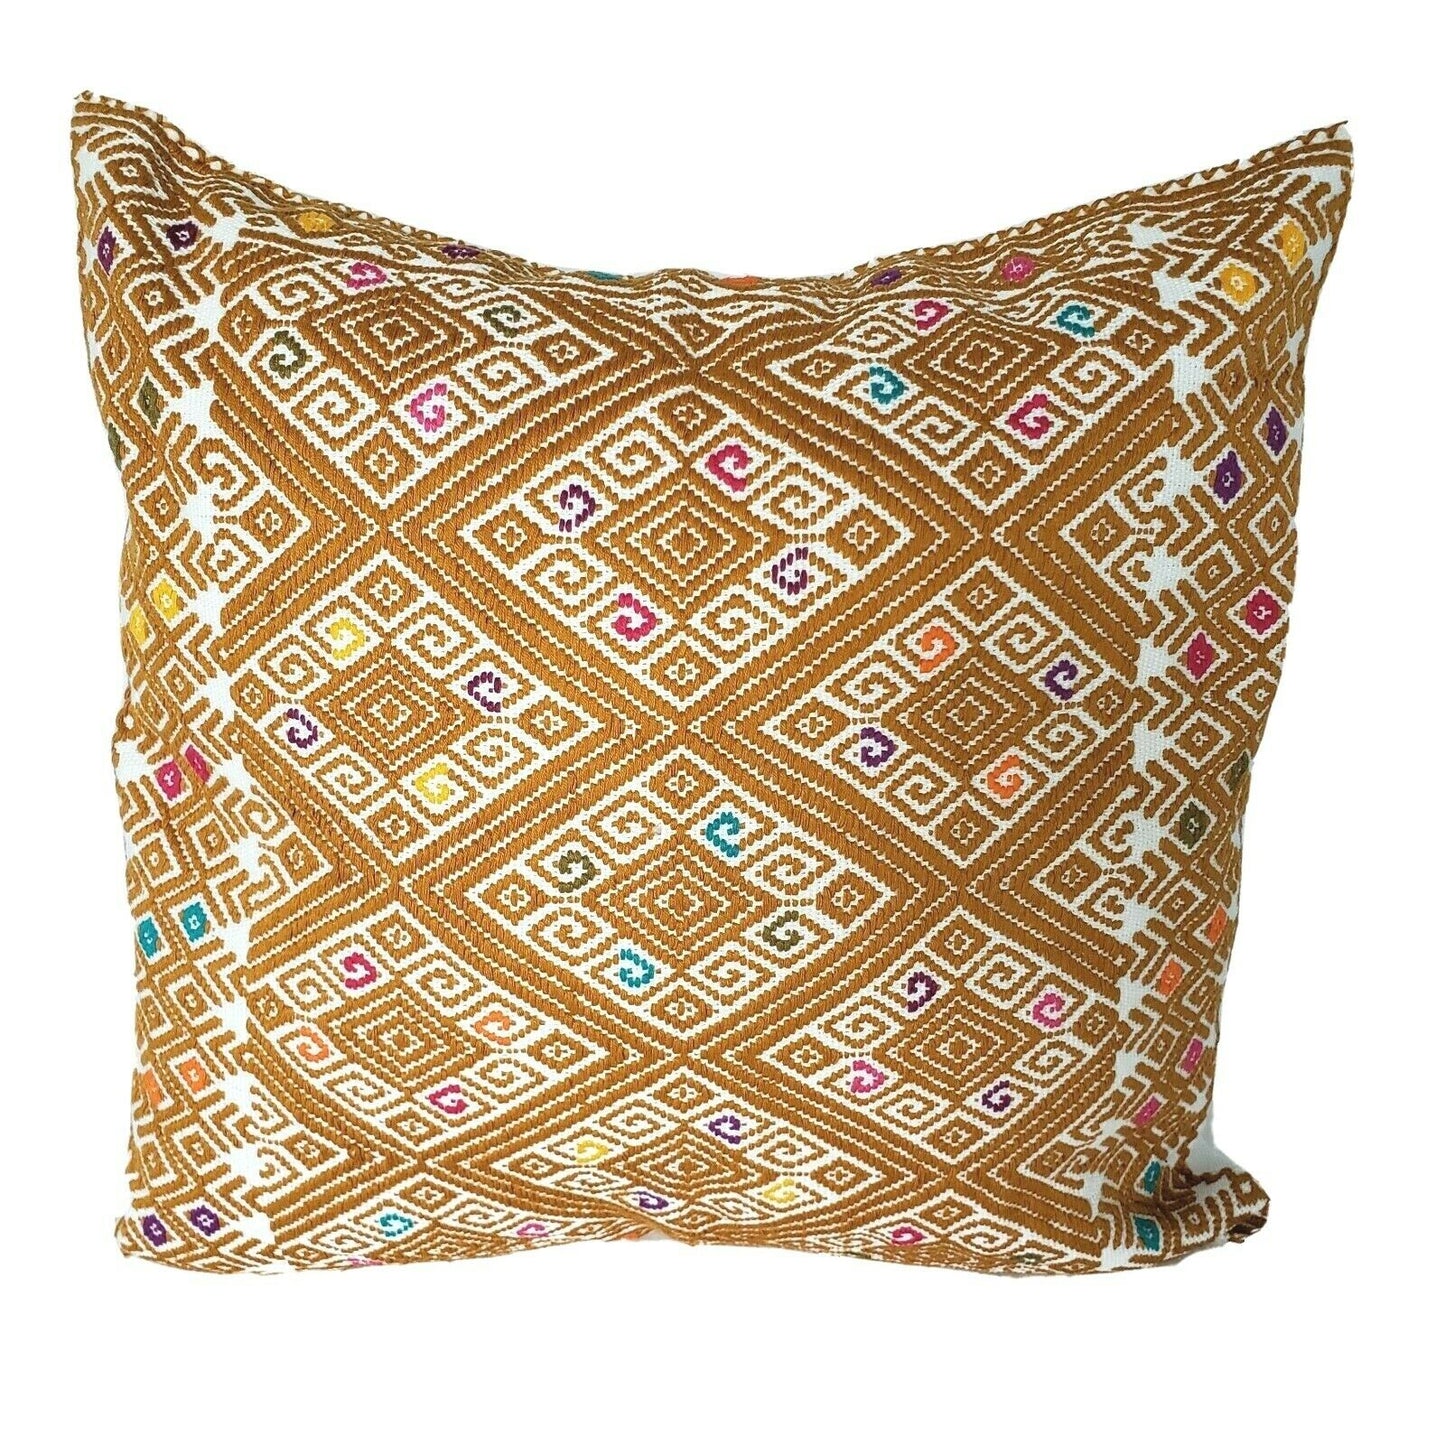 Mexican Mayan Pillow Cover Handmade Embroidered